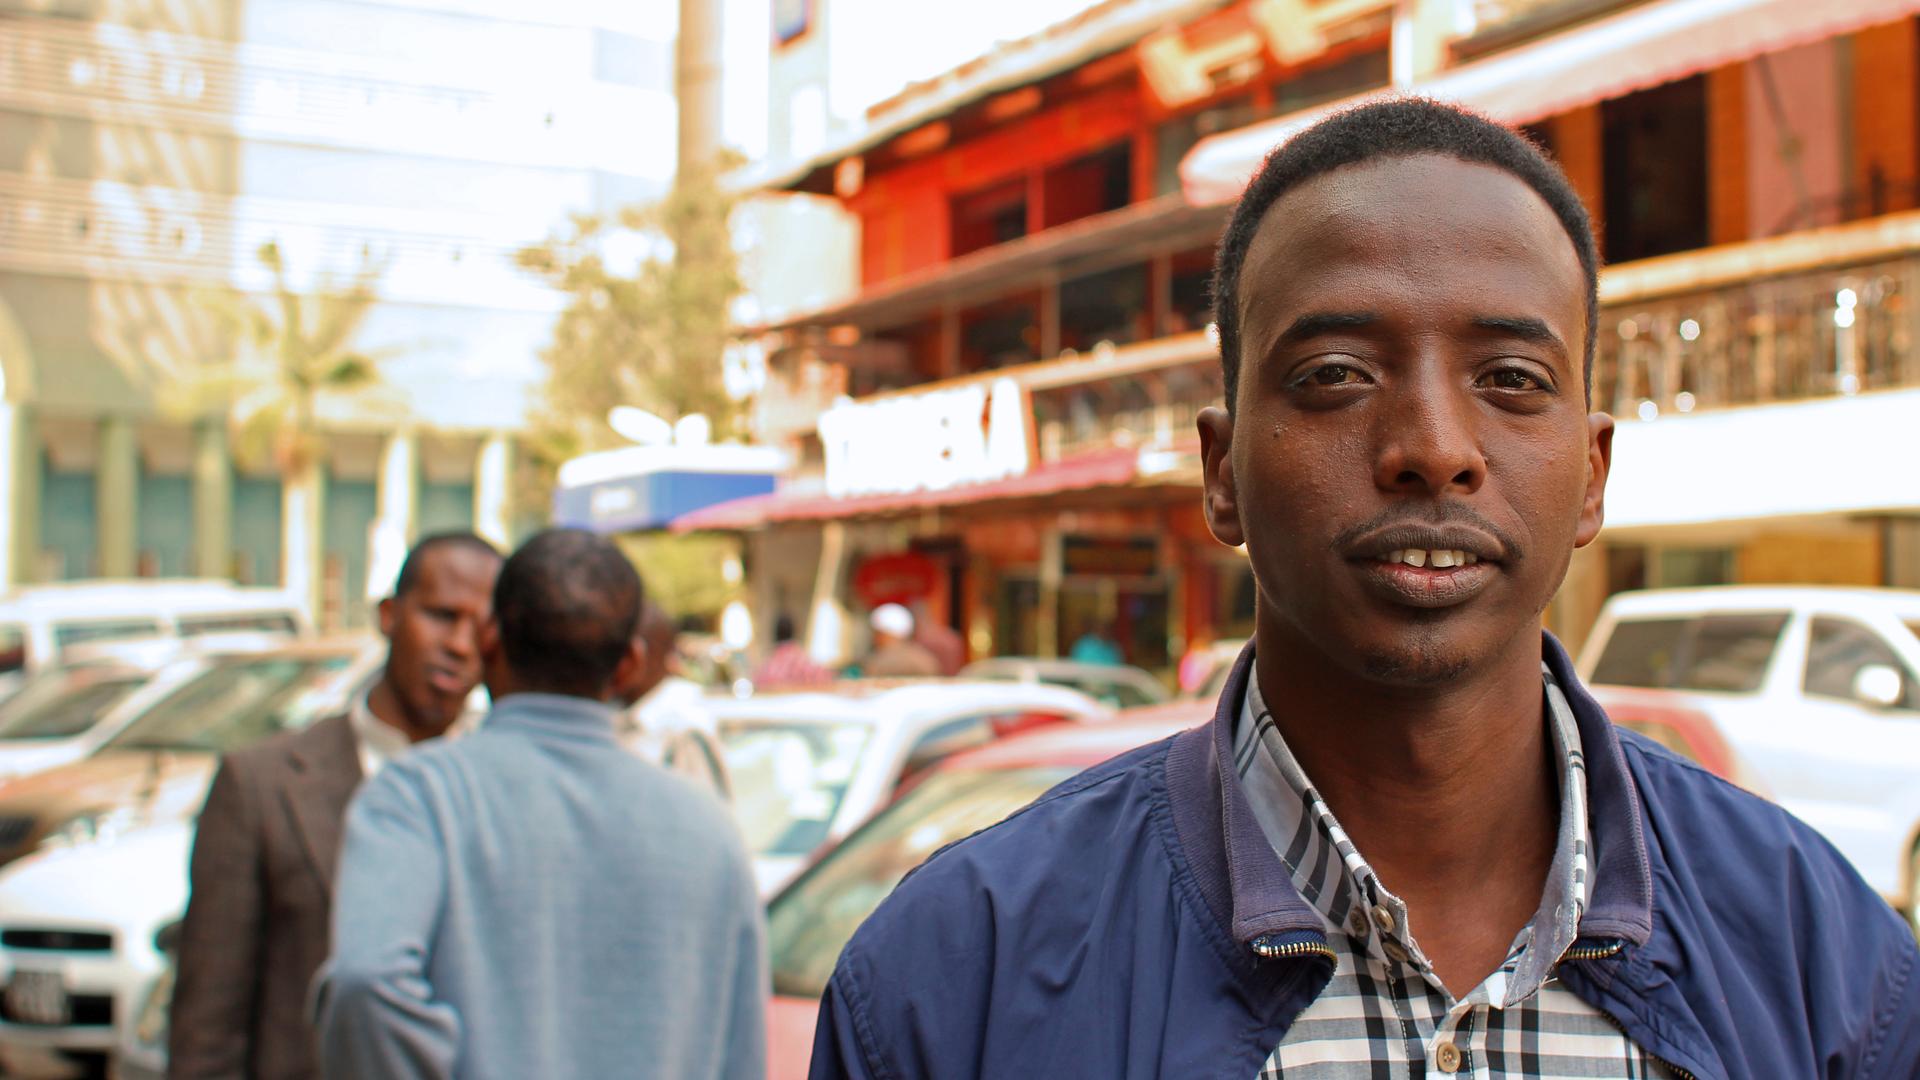 Abdi is pictured while living in Nairobi's 